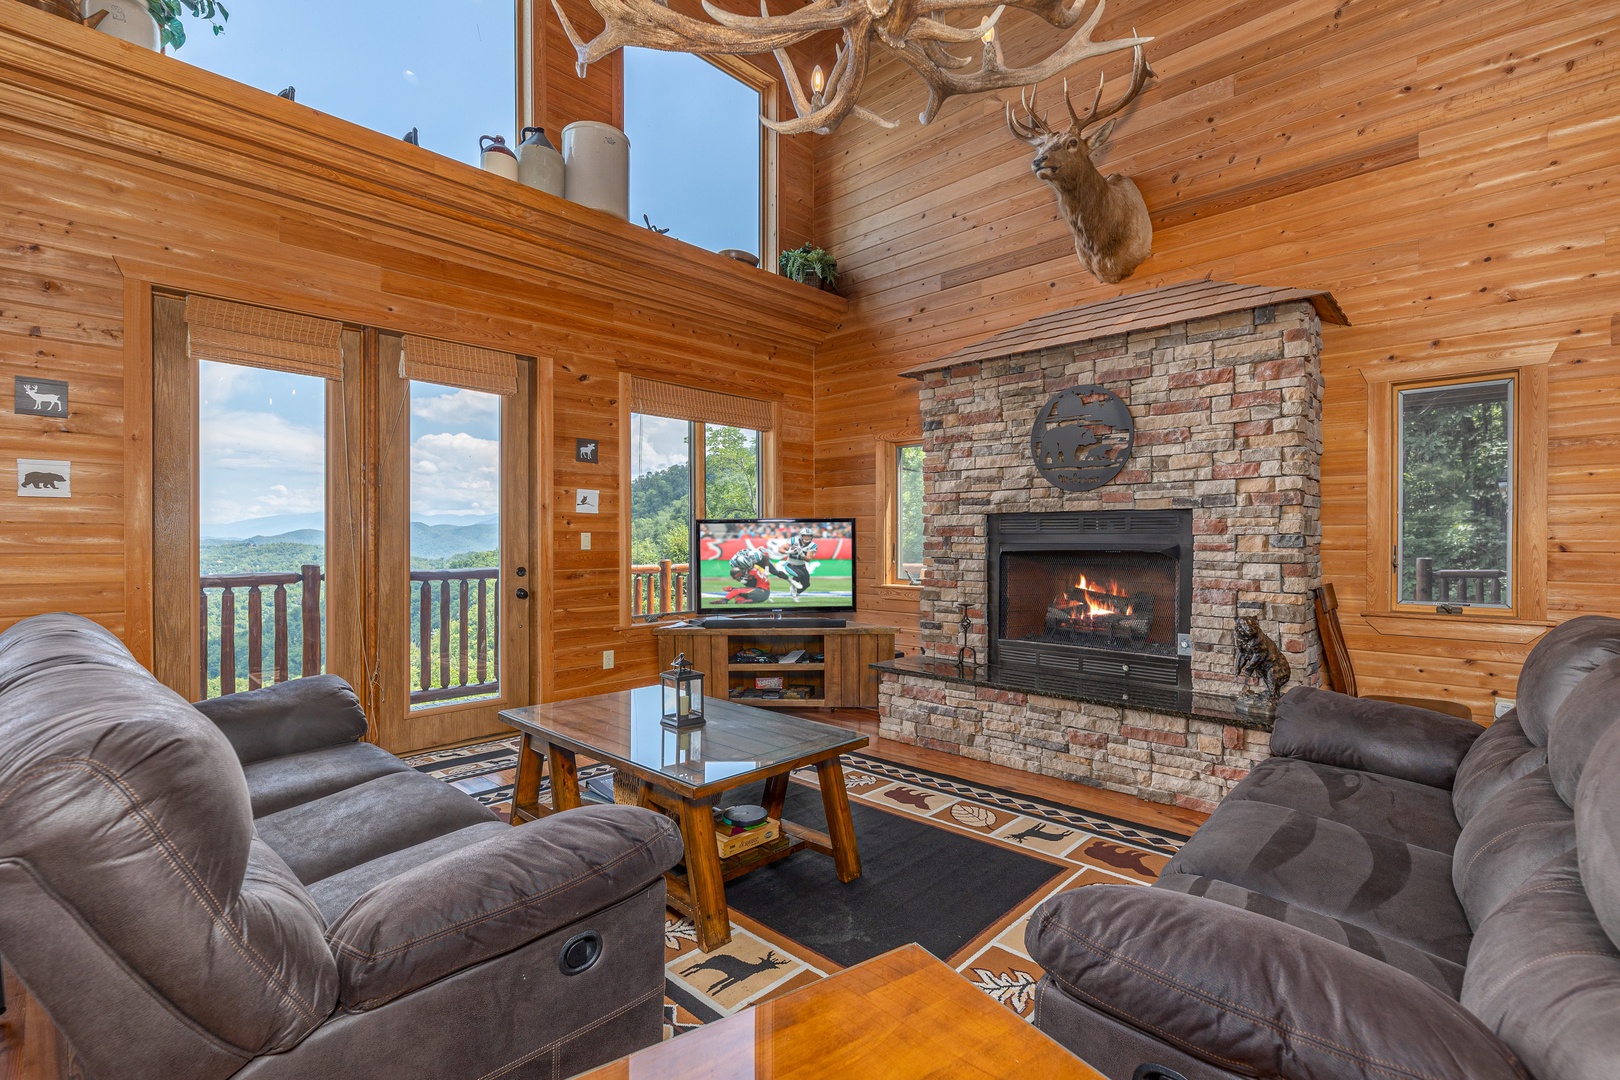 Living room view of fireplace at Sky View, A 4 bedroom cabin rental in Pigeon Forge